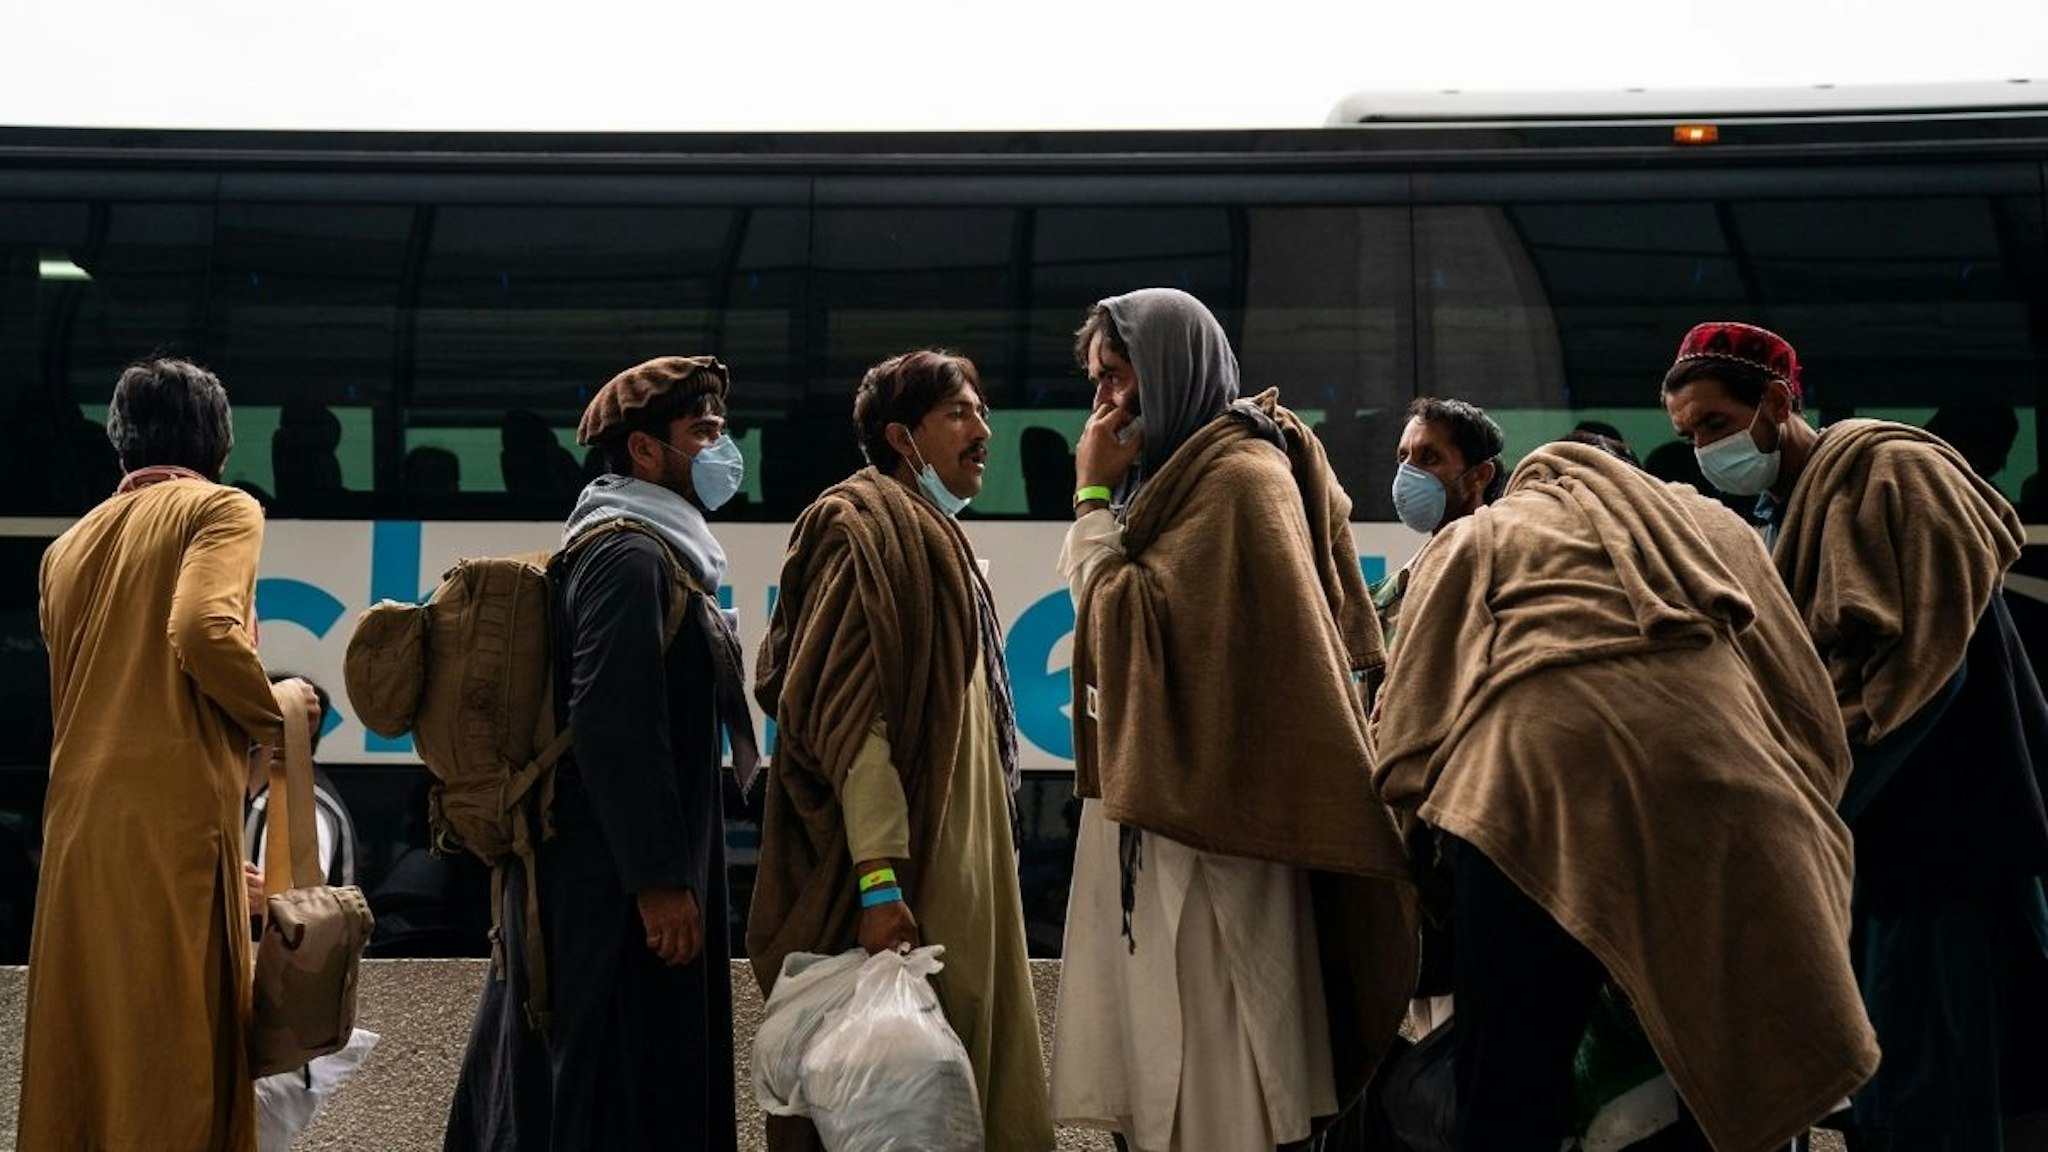 Evacuees who fled Afghanistan walk through the terminal to board buses that will take them to a processing center, at Dulles International Airport on Tuesday, Aug. 31, 2021.